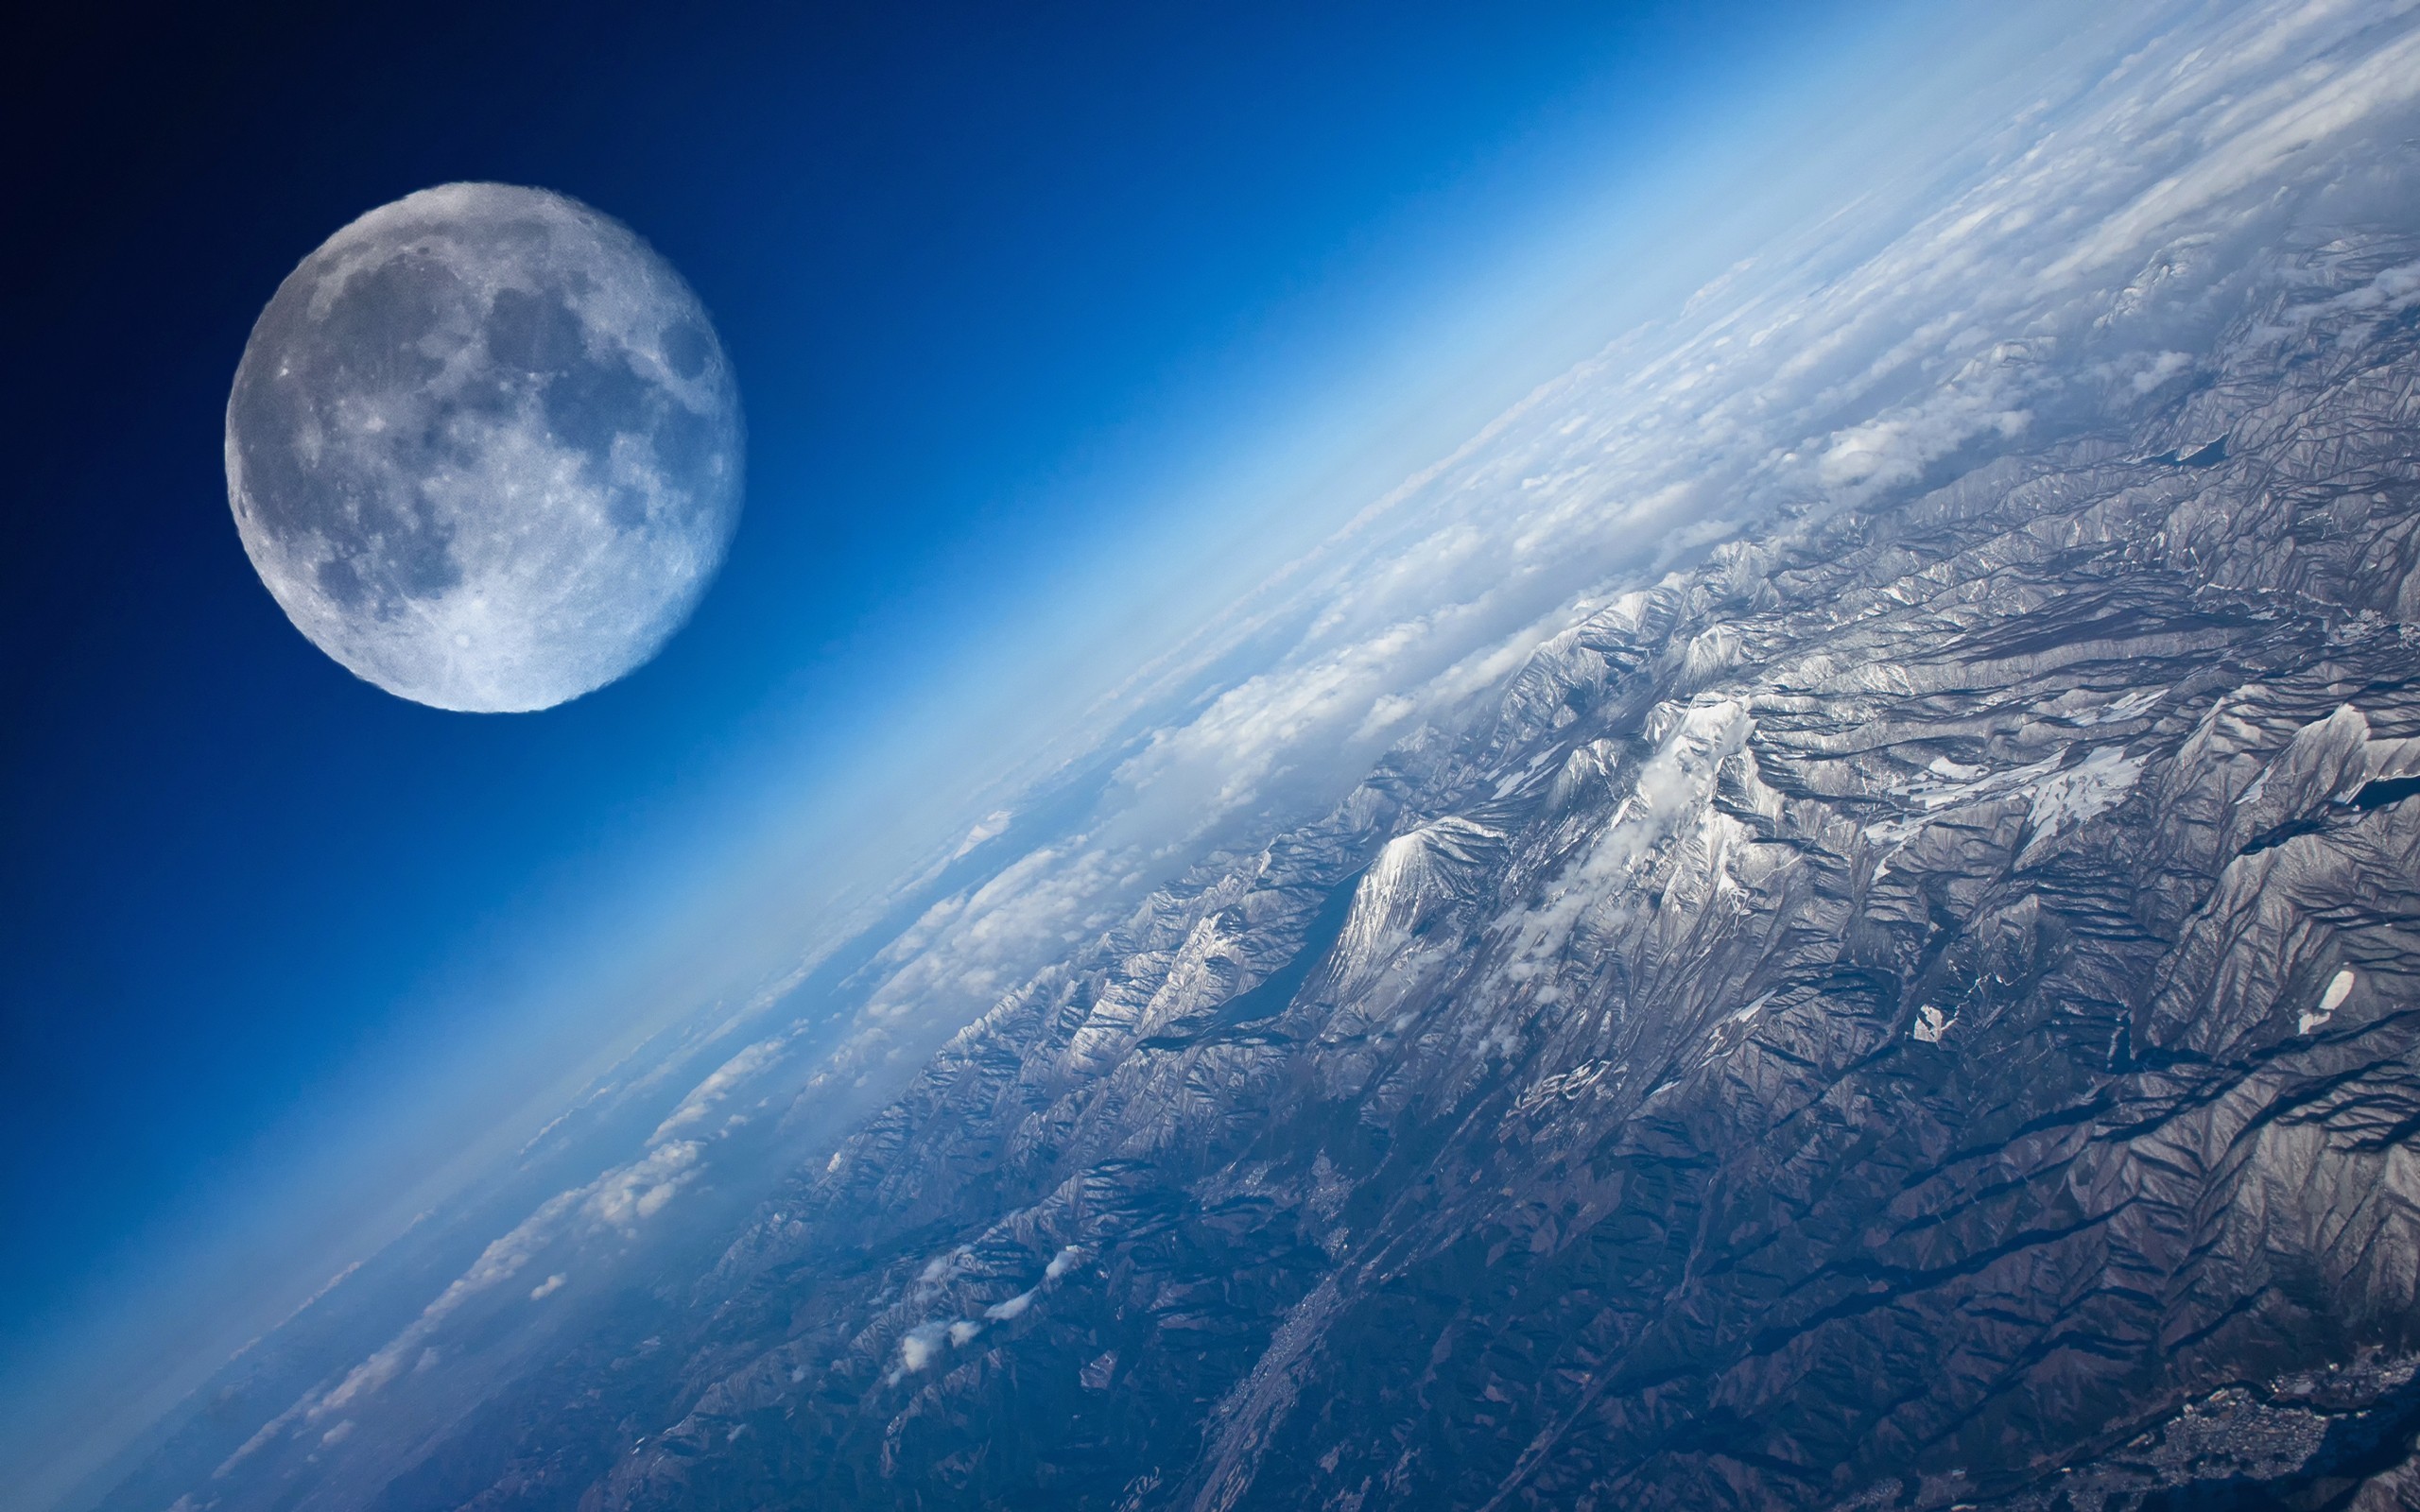 General 2560x1600 Earth planet Moon mountains landscape sky atmosphere